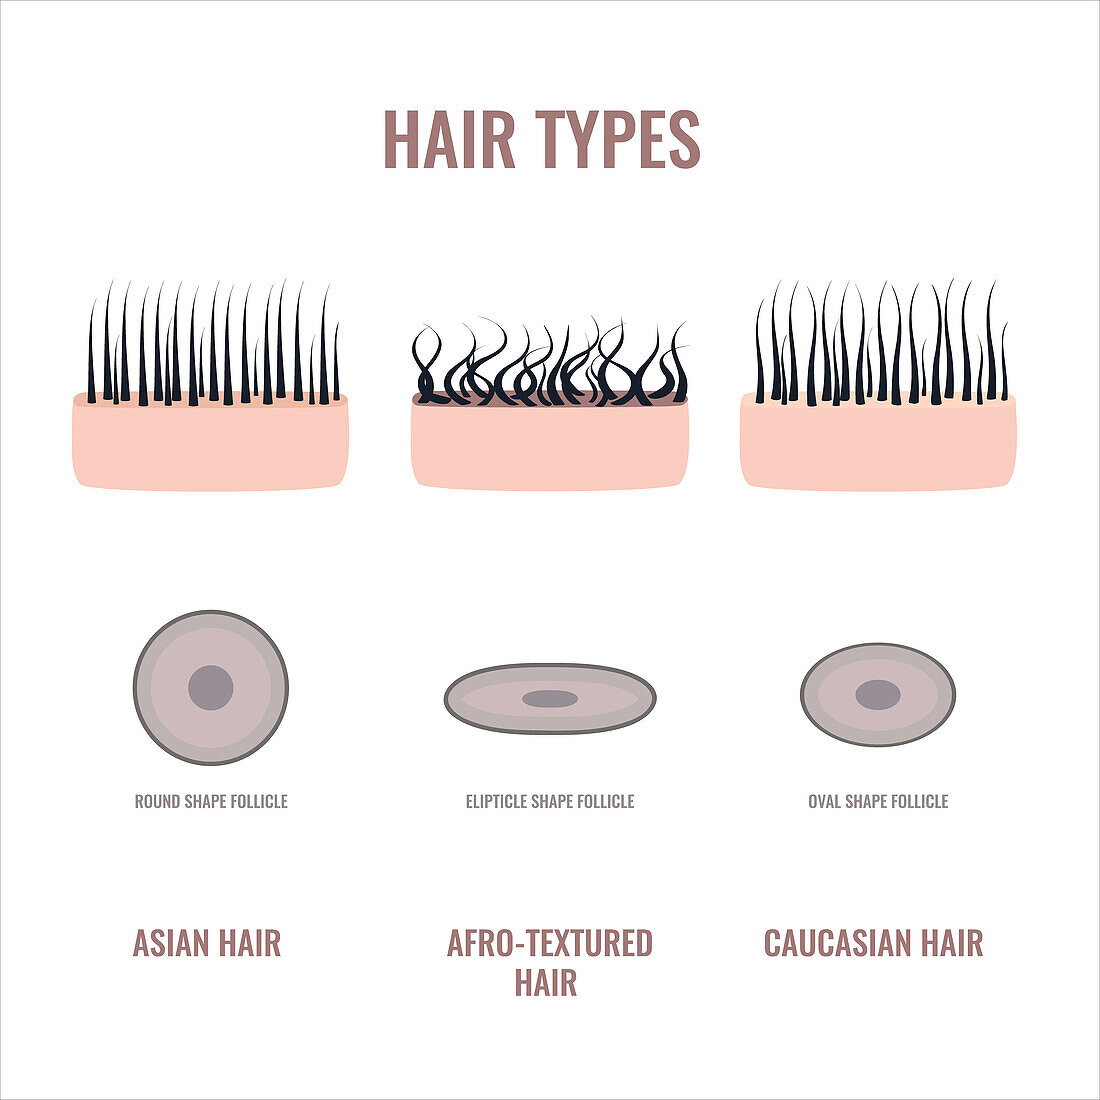 Hair types, conceptual illustration